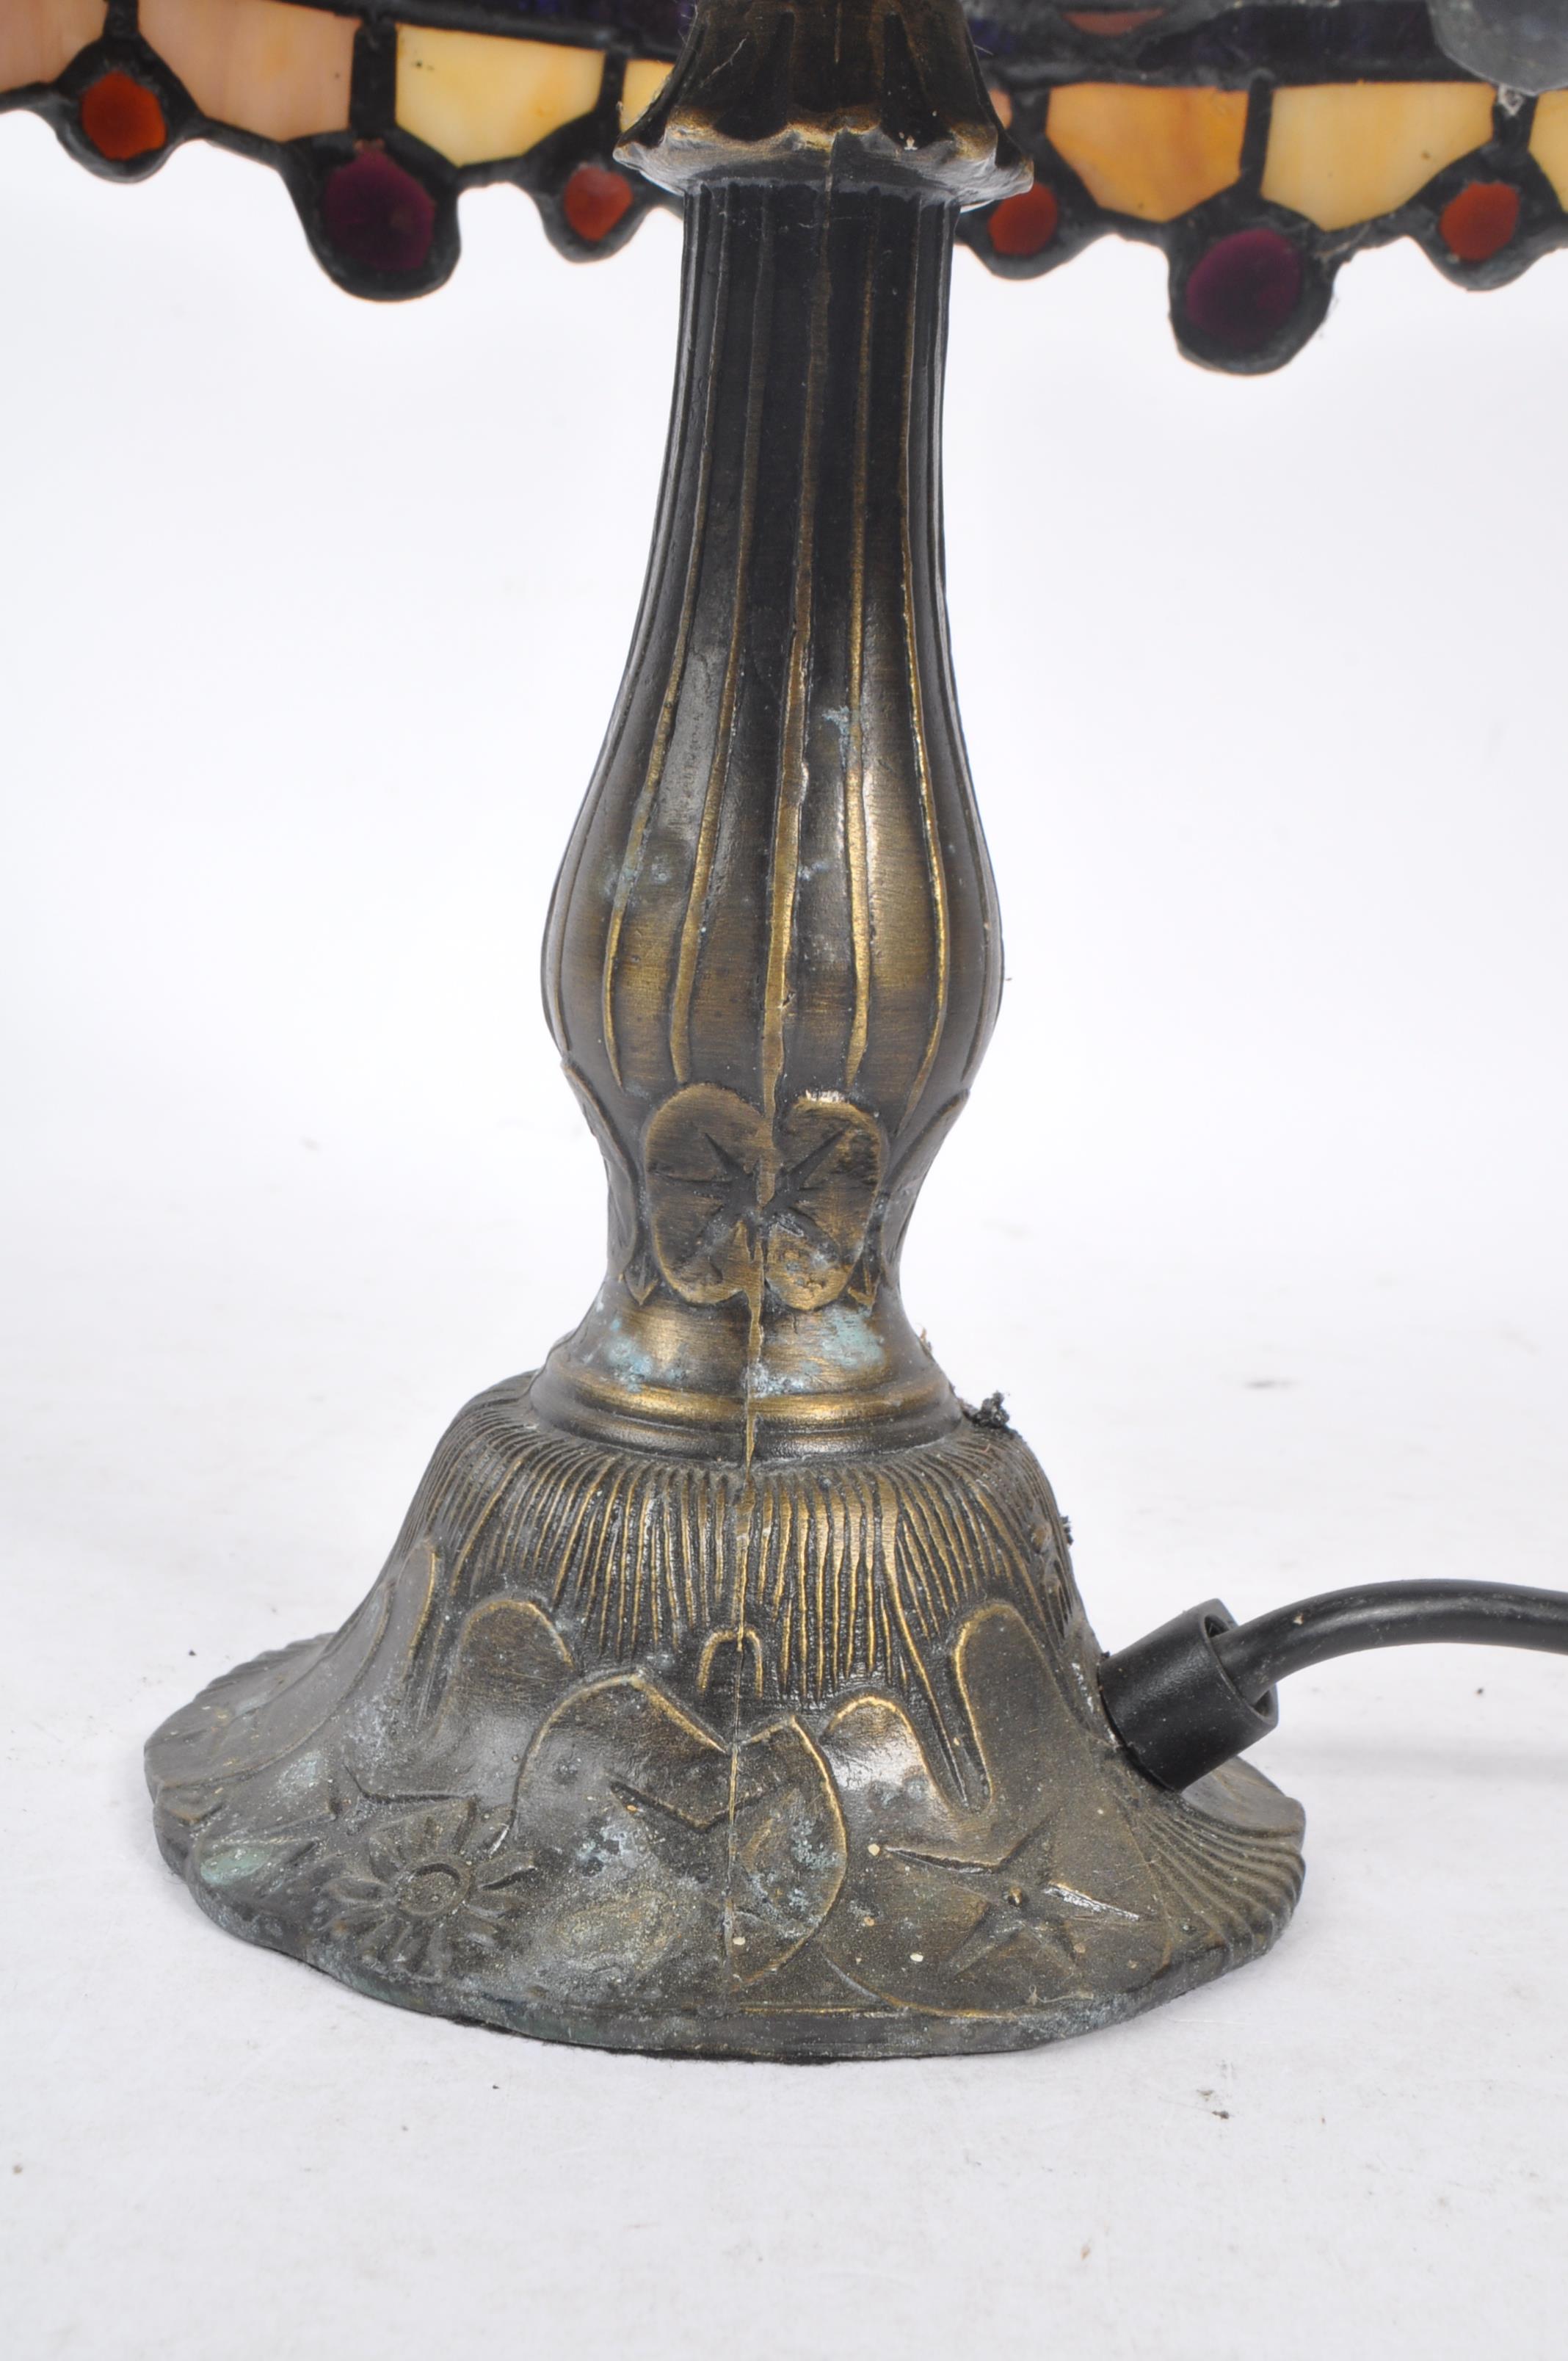 VINTAGE 20TH CENTURY ART NOUVEAU TIFFANY STYLE TABLE LAMP - Image 5 of 5